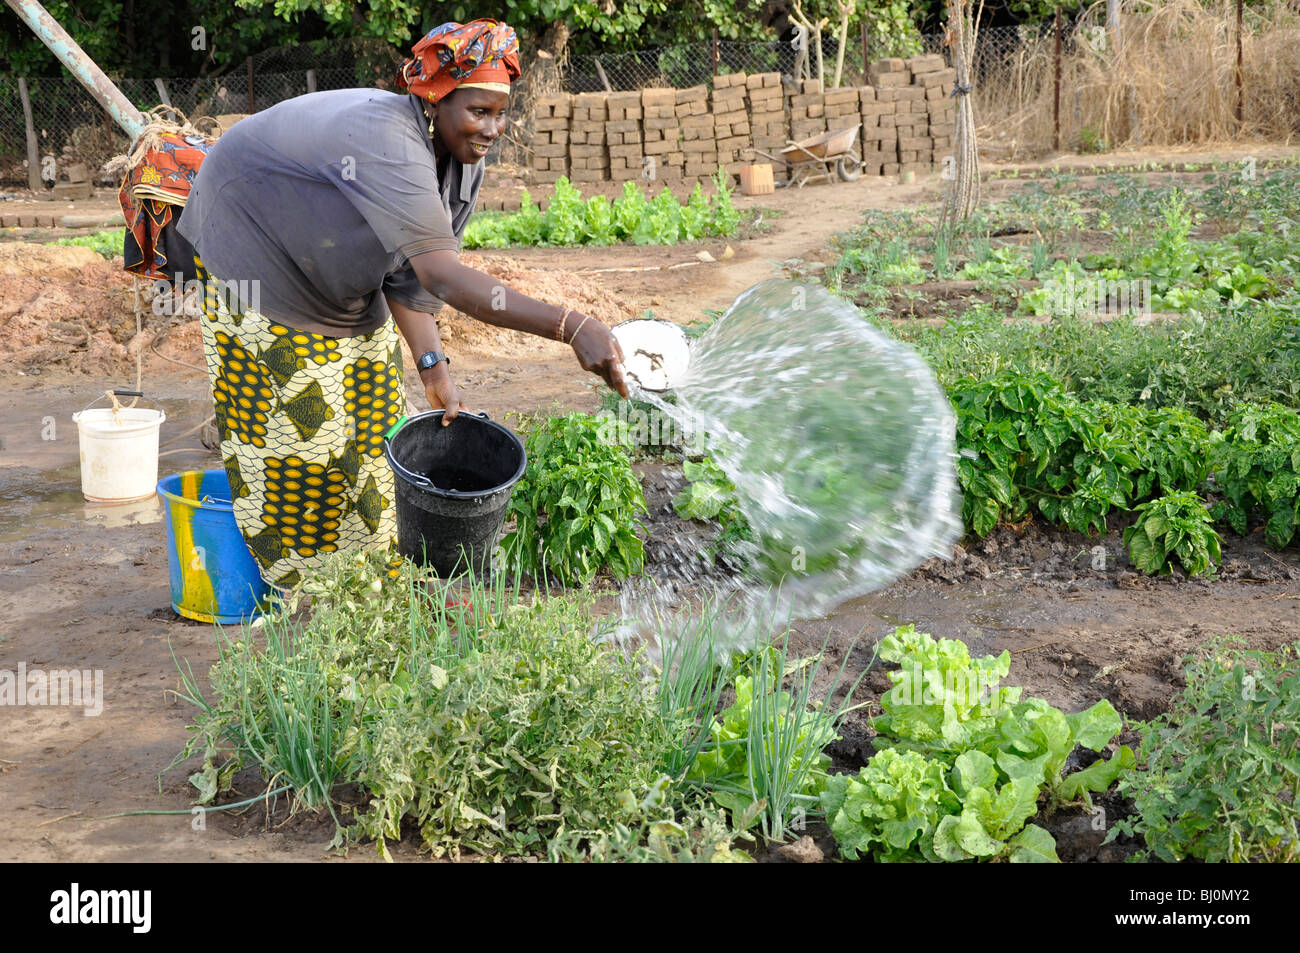 Tending The Vegetable Garden In The Gambia Stock Photo 28290614